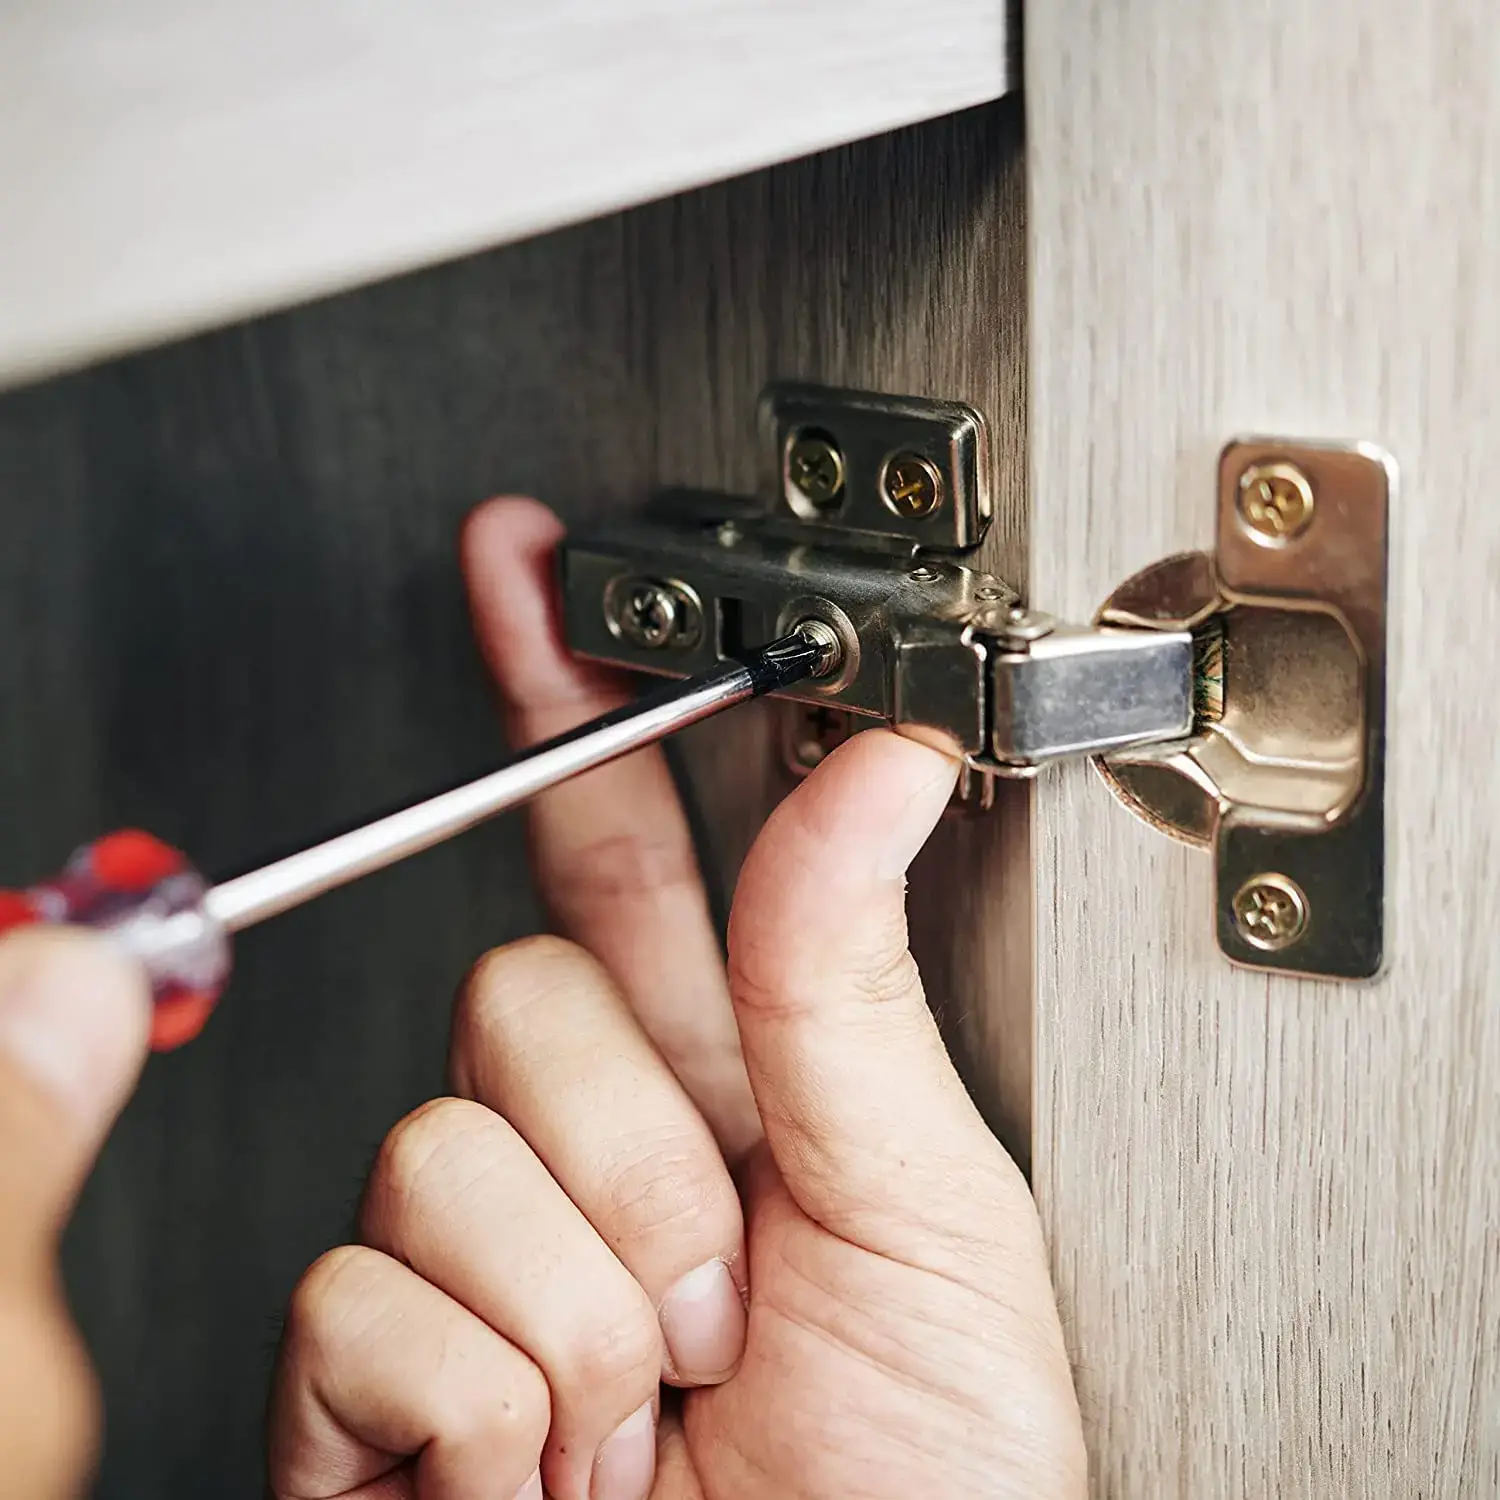 How to replace Soft Close Cabinet Hinges without destroying the structure of the cabinet?